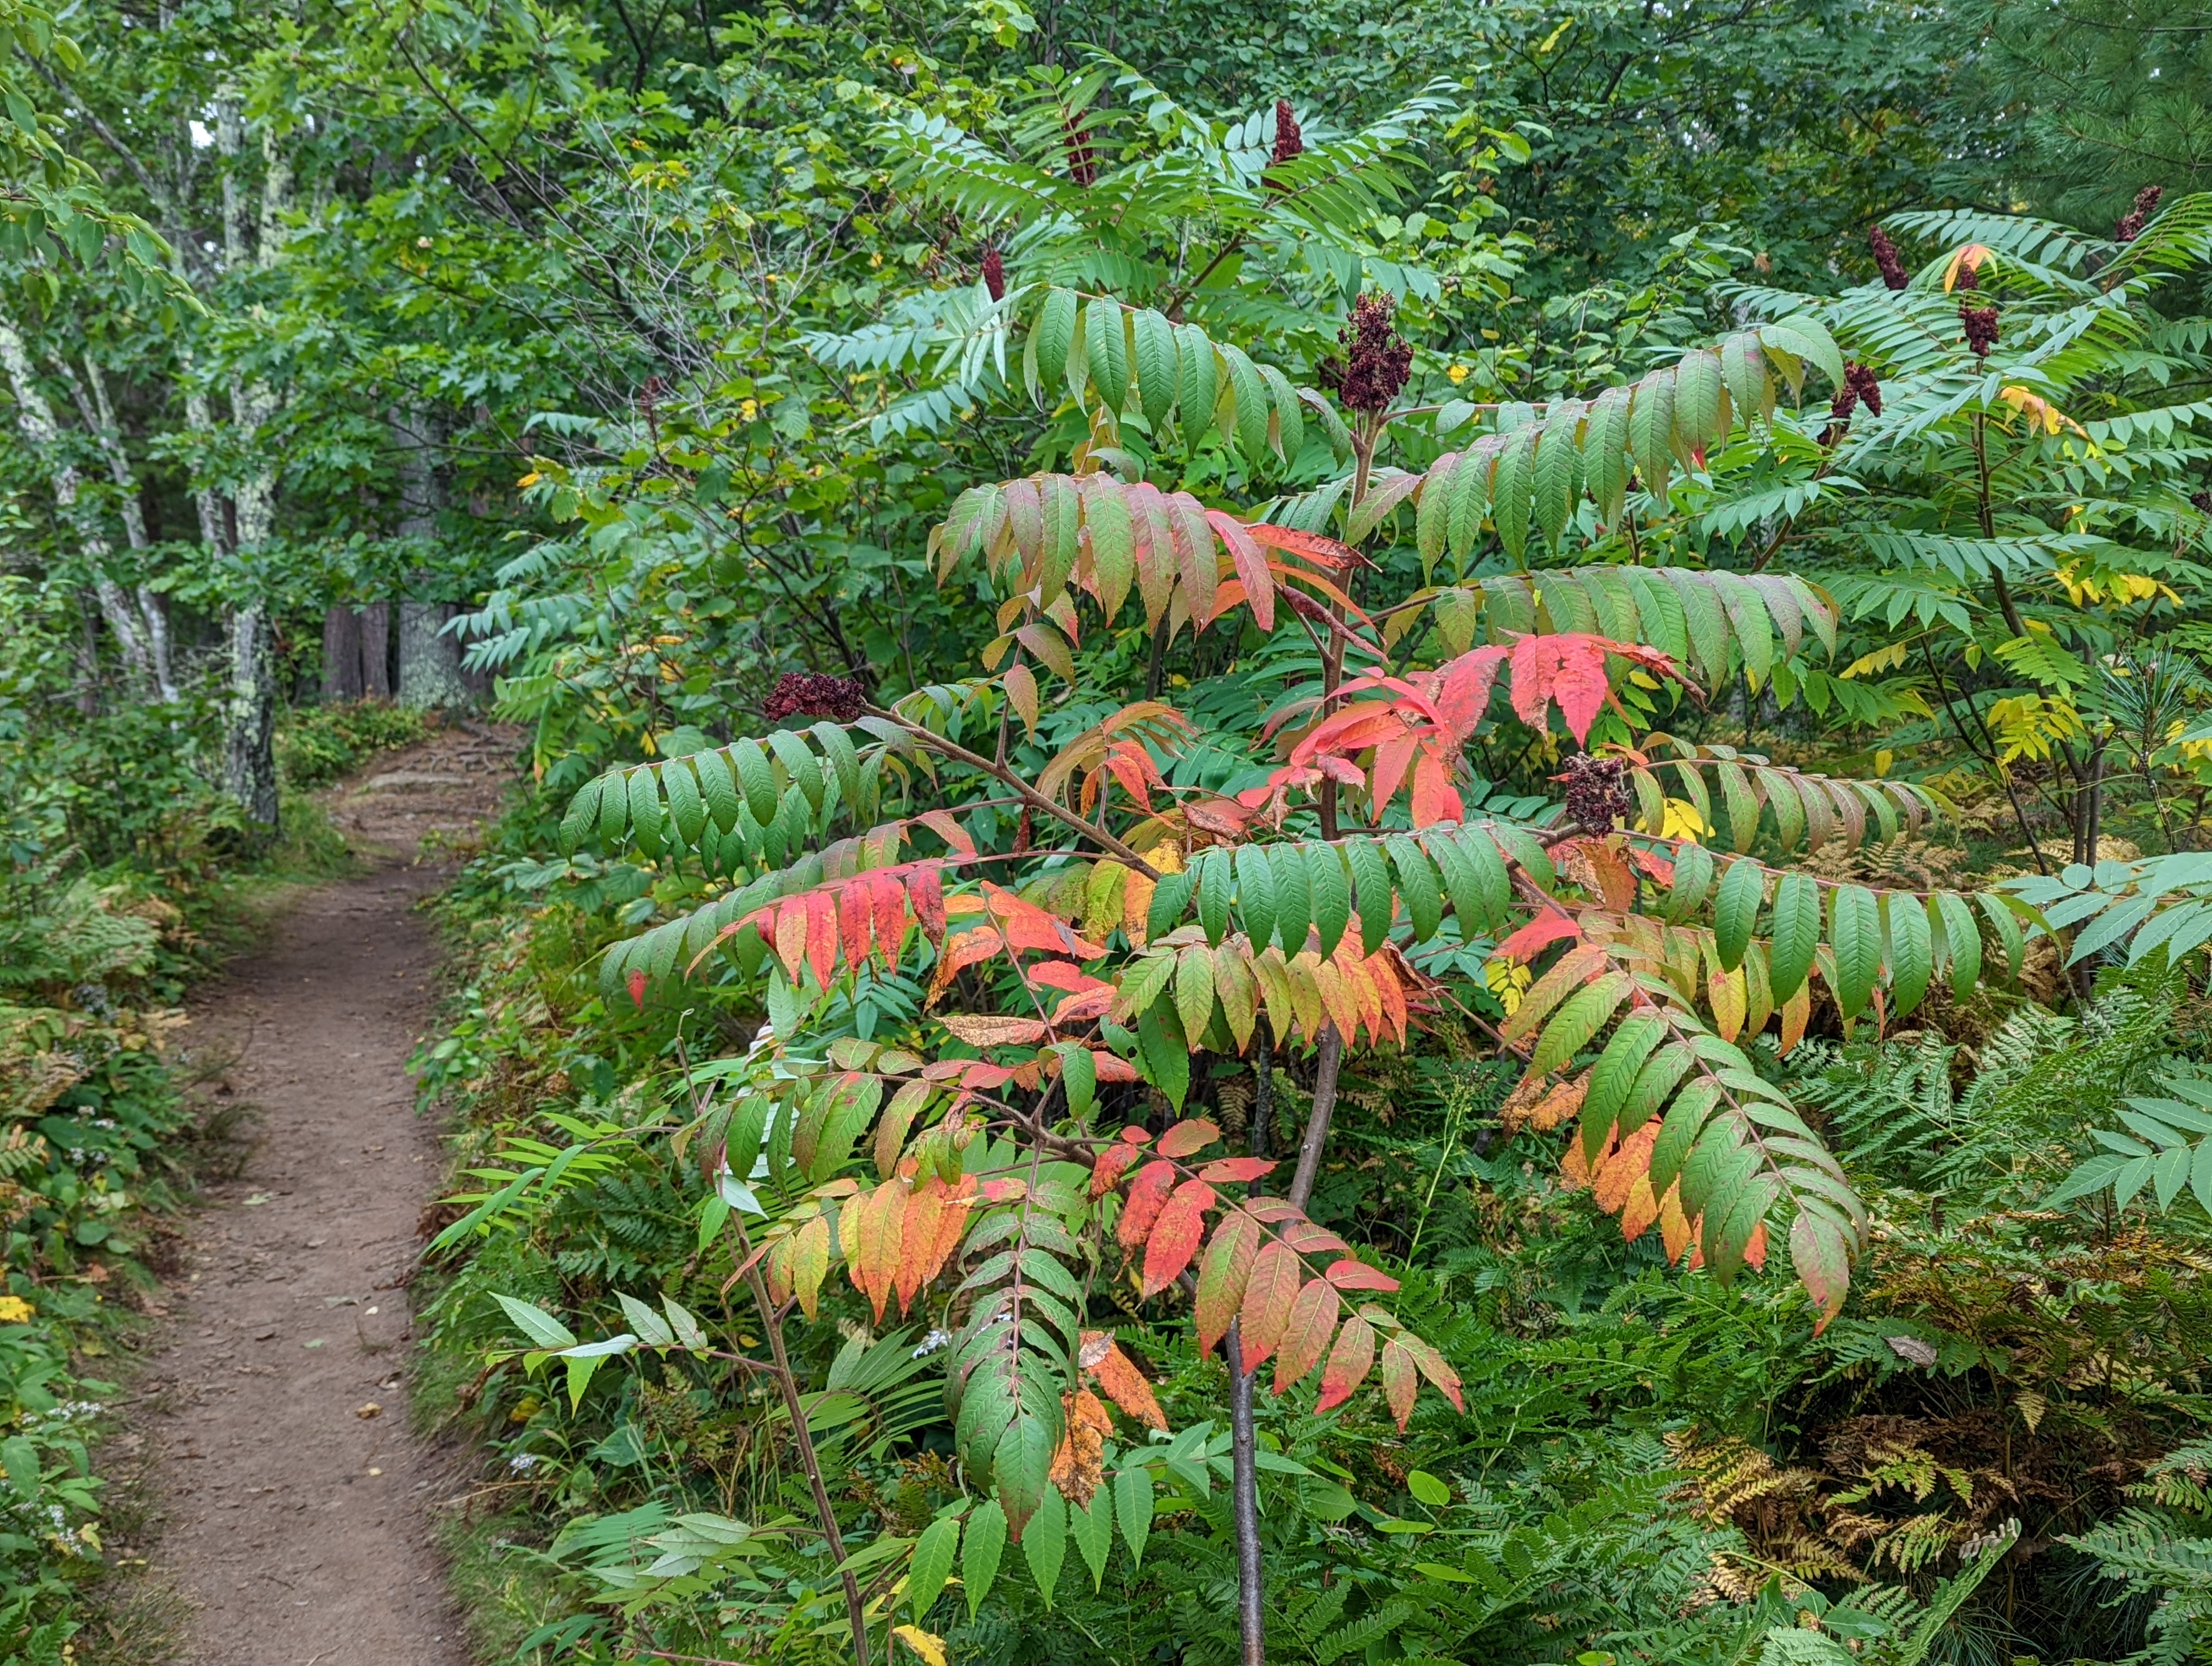 Sumac in a forest.